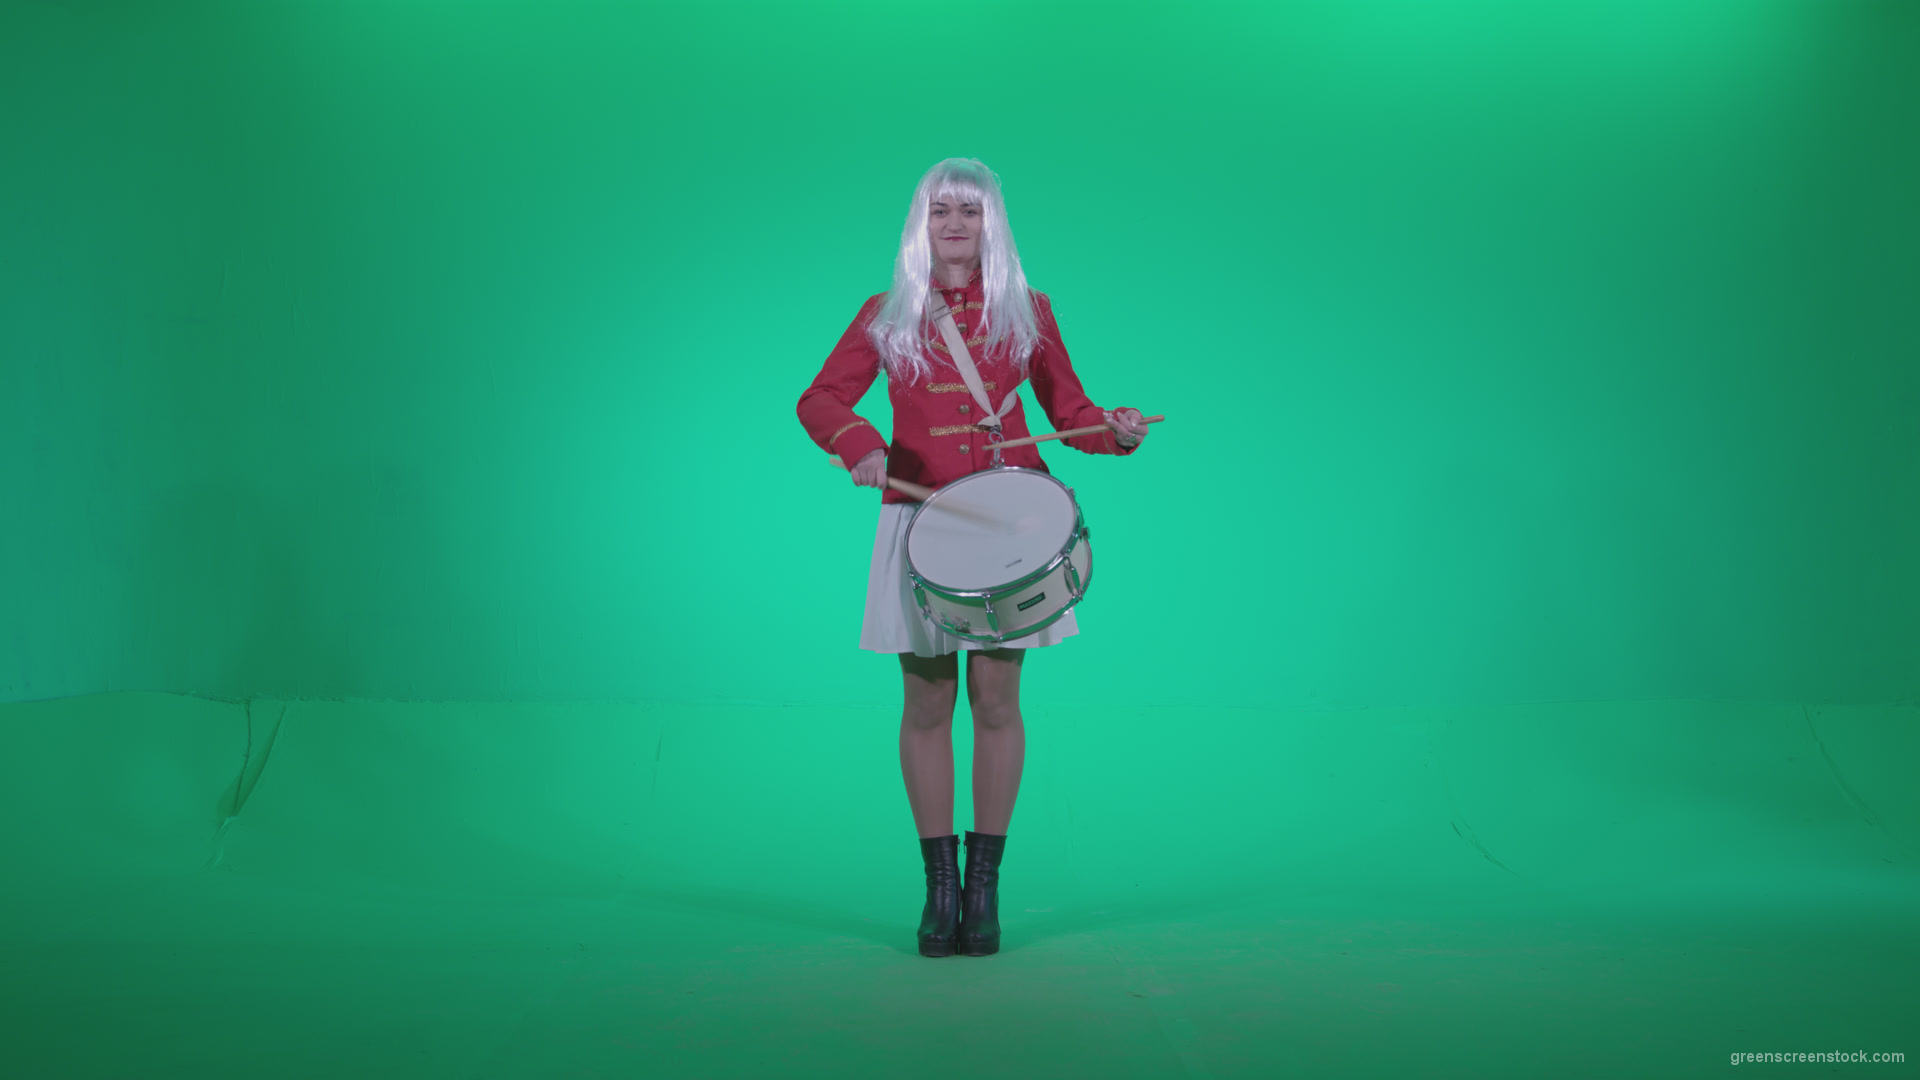 Snare-Drumming-girl-with-white-haire-z1_009 Green Screen Stock